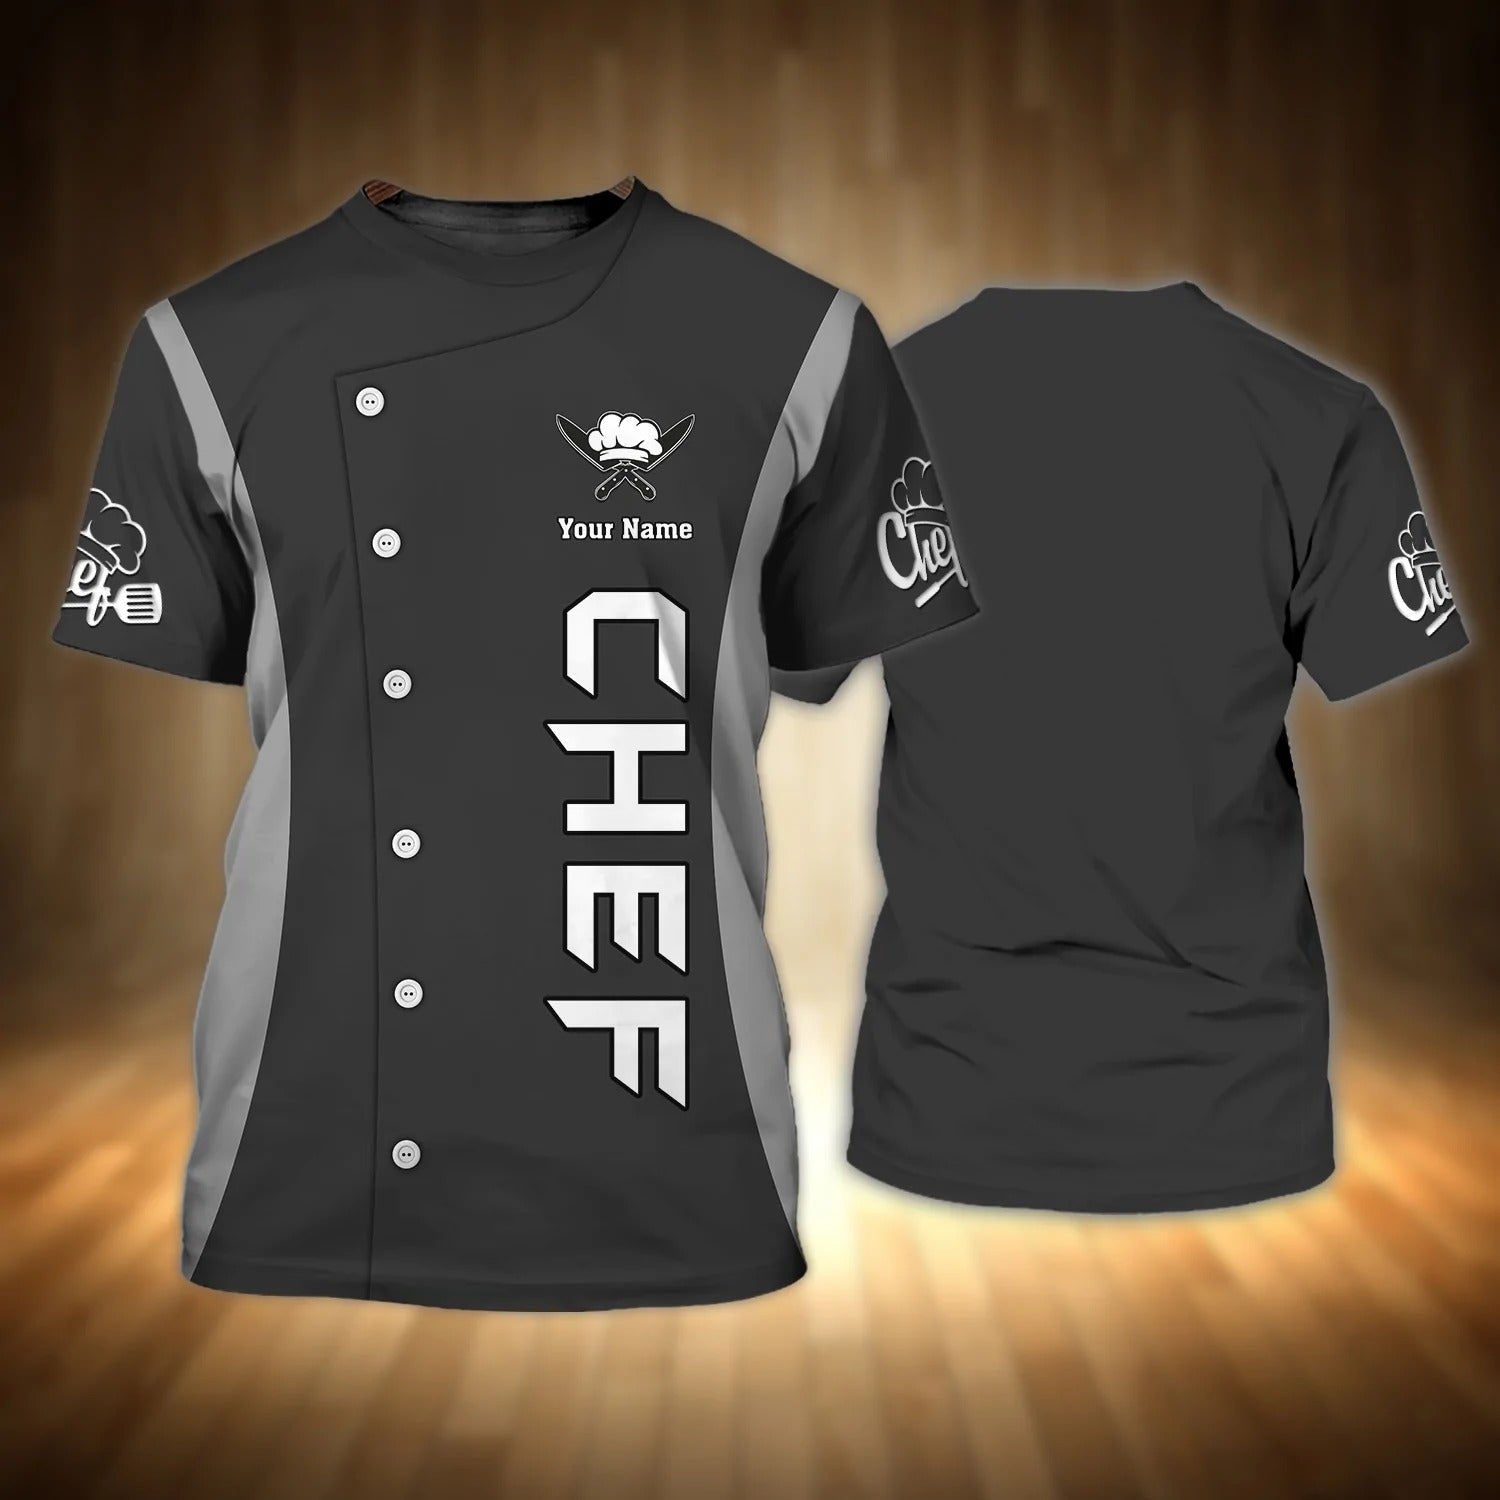 Customized 3D Chef Shirt/ Chef Cook Tshirt For Him Her/ Chef Tee 3D